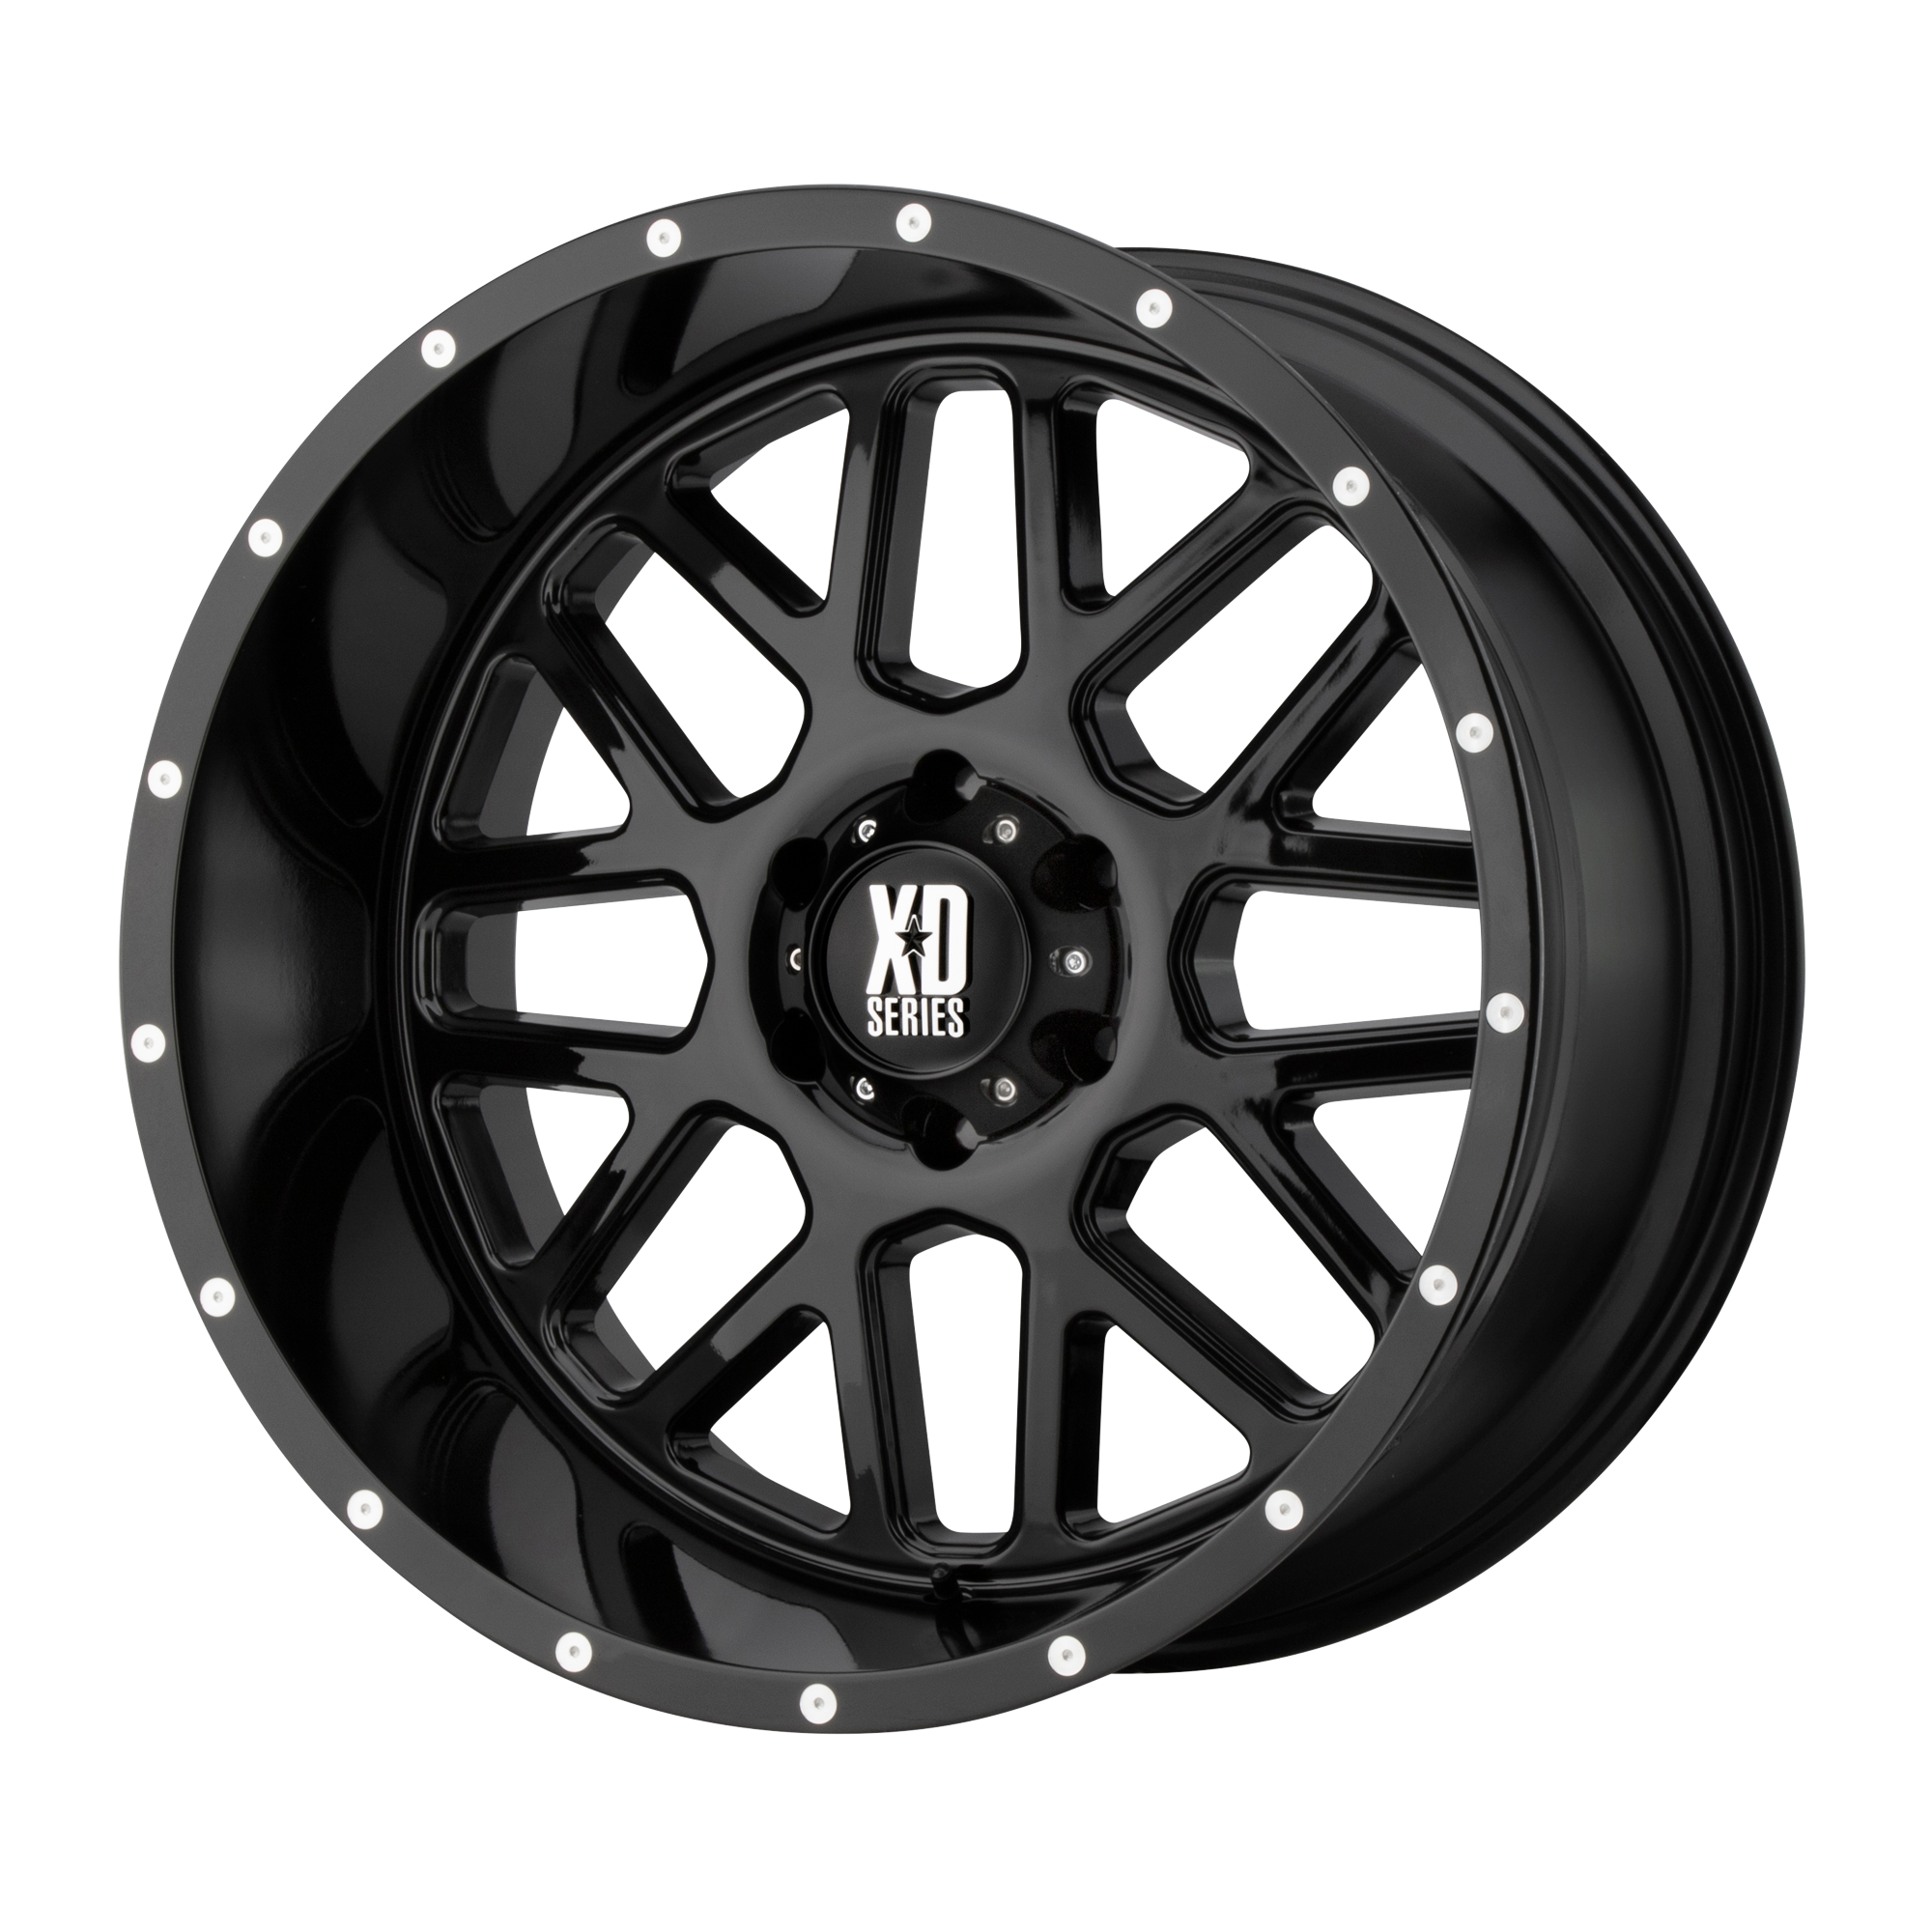 GRENADE 20x12 6x139.70 GLOSS BLACK (-44 mm) - Tires and Engine Performance